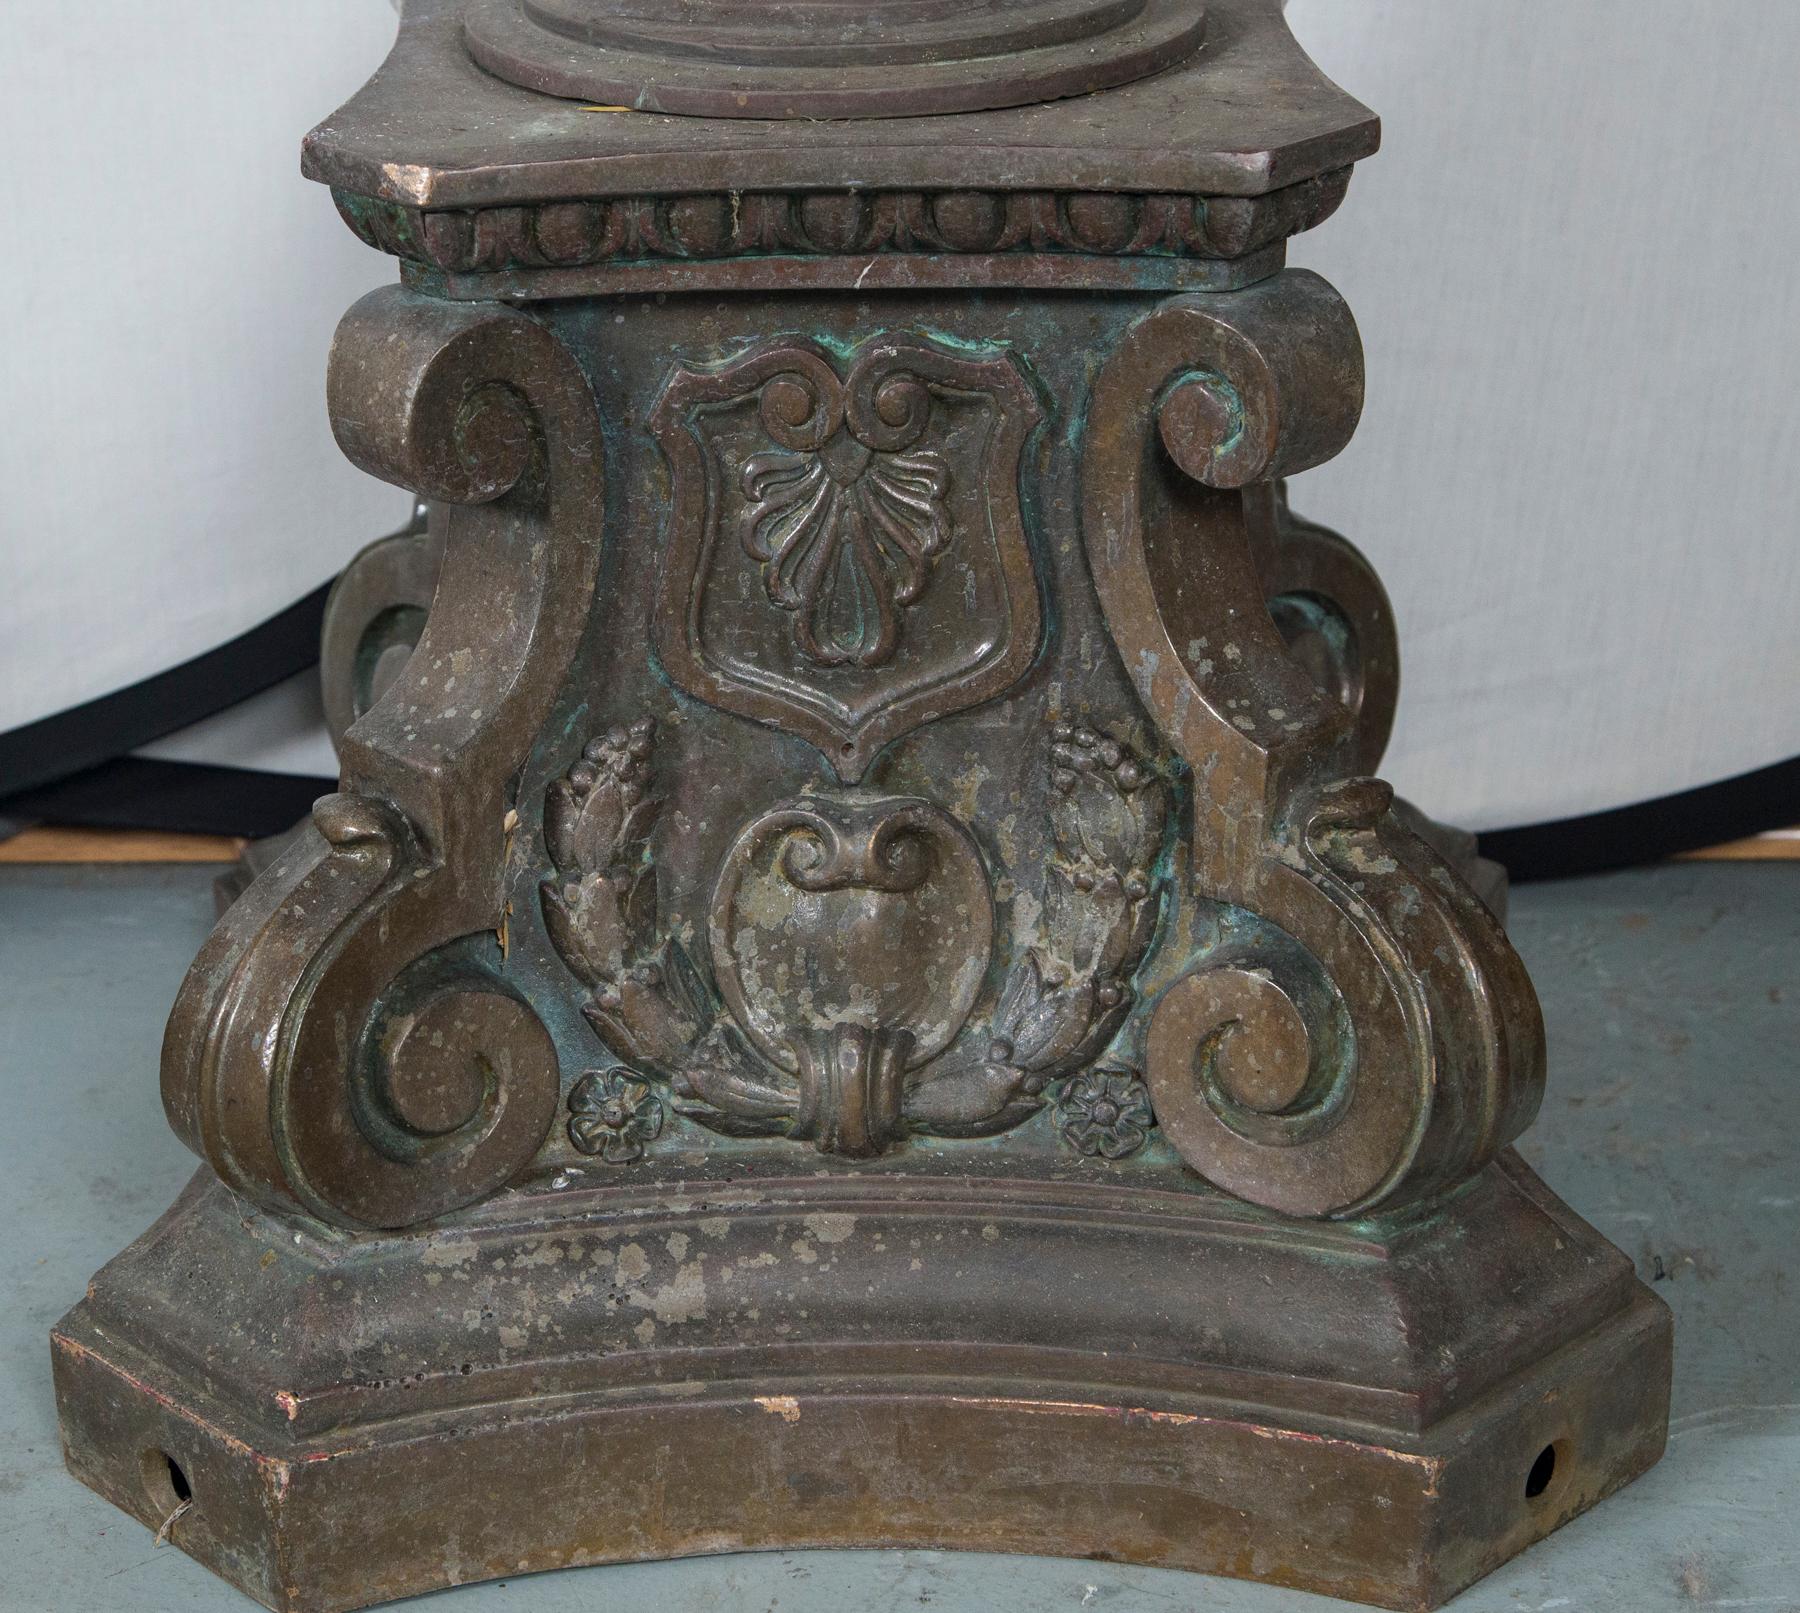 Magnificent bronze torchieres standing over 8 feet tall. Olde world craftsmanship at its finest. One has been polished and is missing a plate (see initial photo on left). The other has a wonderful patina finish. Globes are not original to these